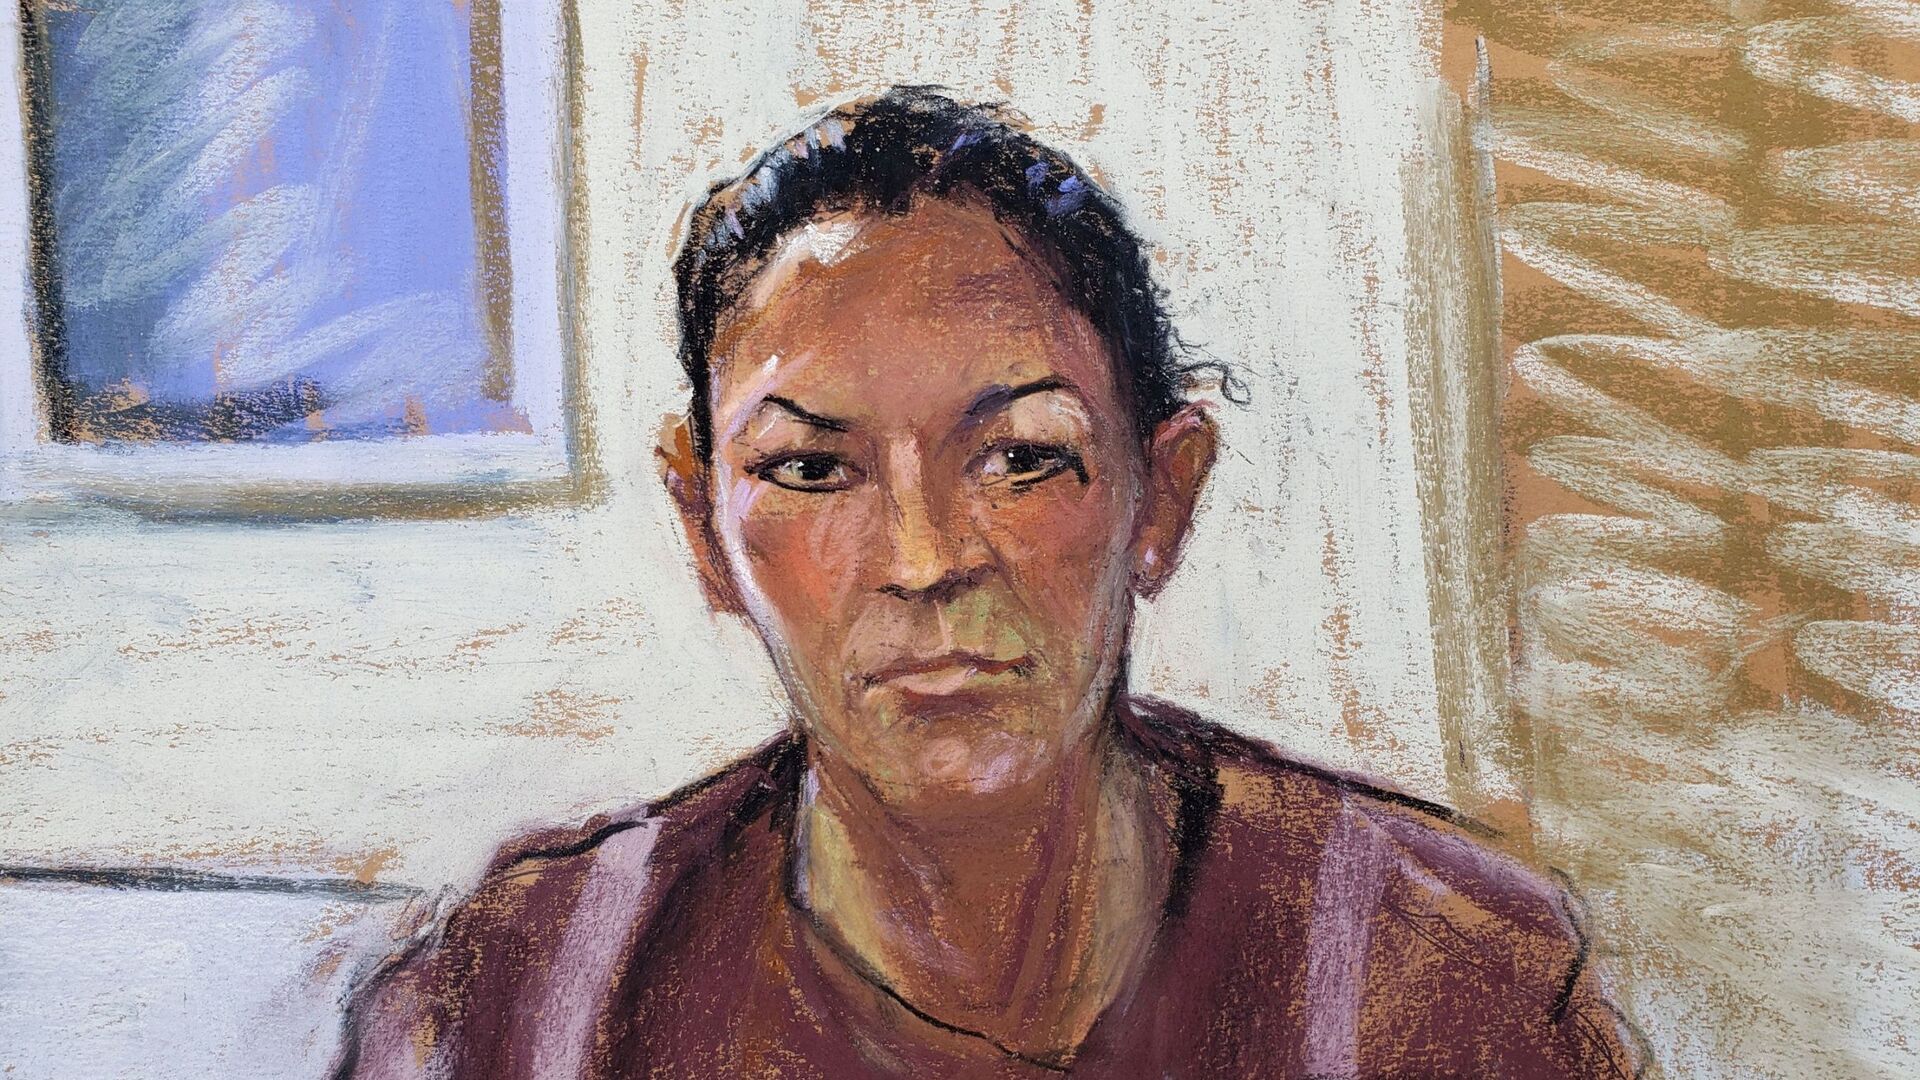 Ghislaine Maxwell appears via video link during her arraignment hearing where she was denied bail for her role aiding Jeffrey Epstein to recruit and eventually abuse of minor girls, in Manhattan Federal Court, in the Manhattan borough of New York City, New York, U.S. July 14, 2020 in this courtroom sketch - Sputnik International, 1920, 04.11.2021